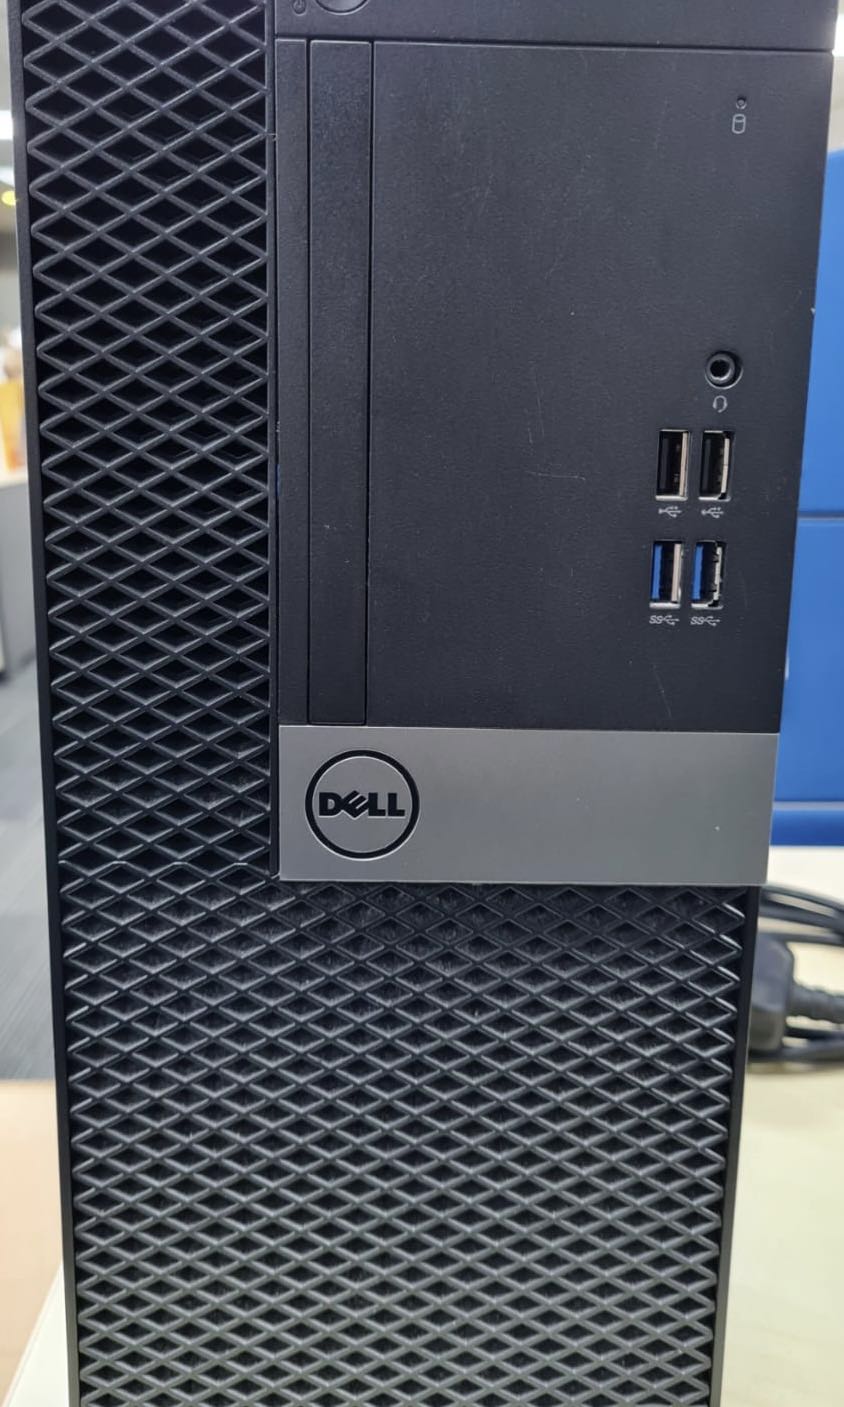 Dell 3040 MT PC, Computers  Tech, Desktops on Carousell